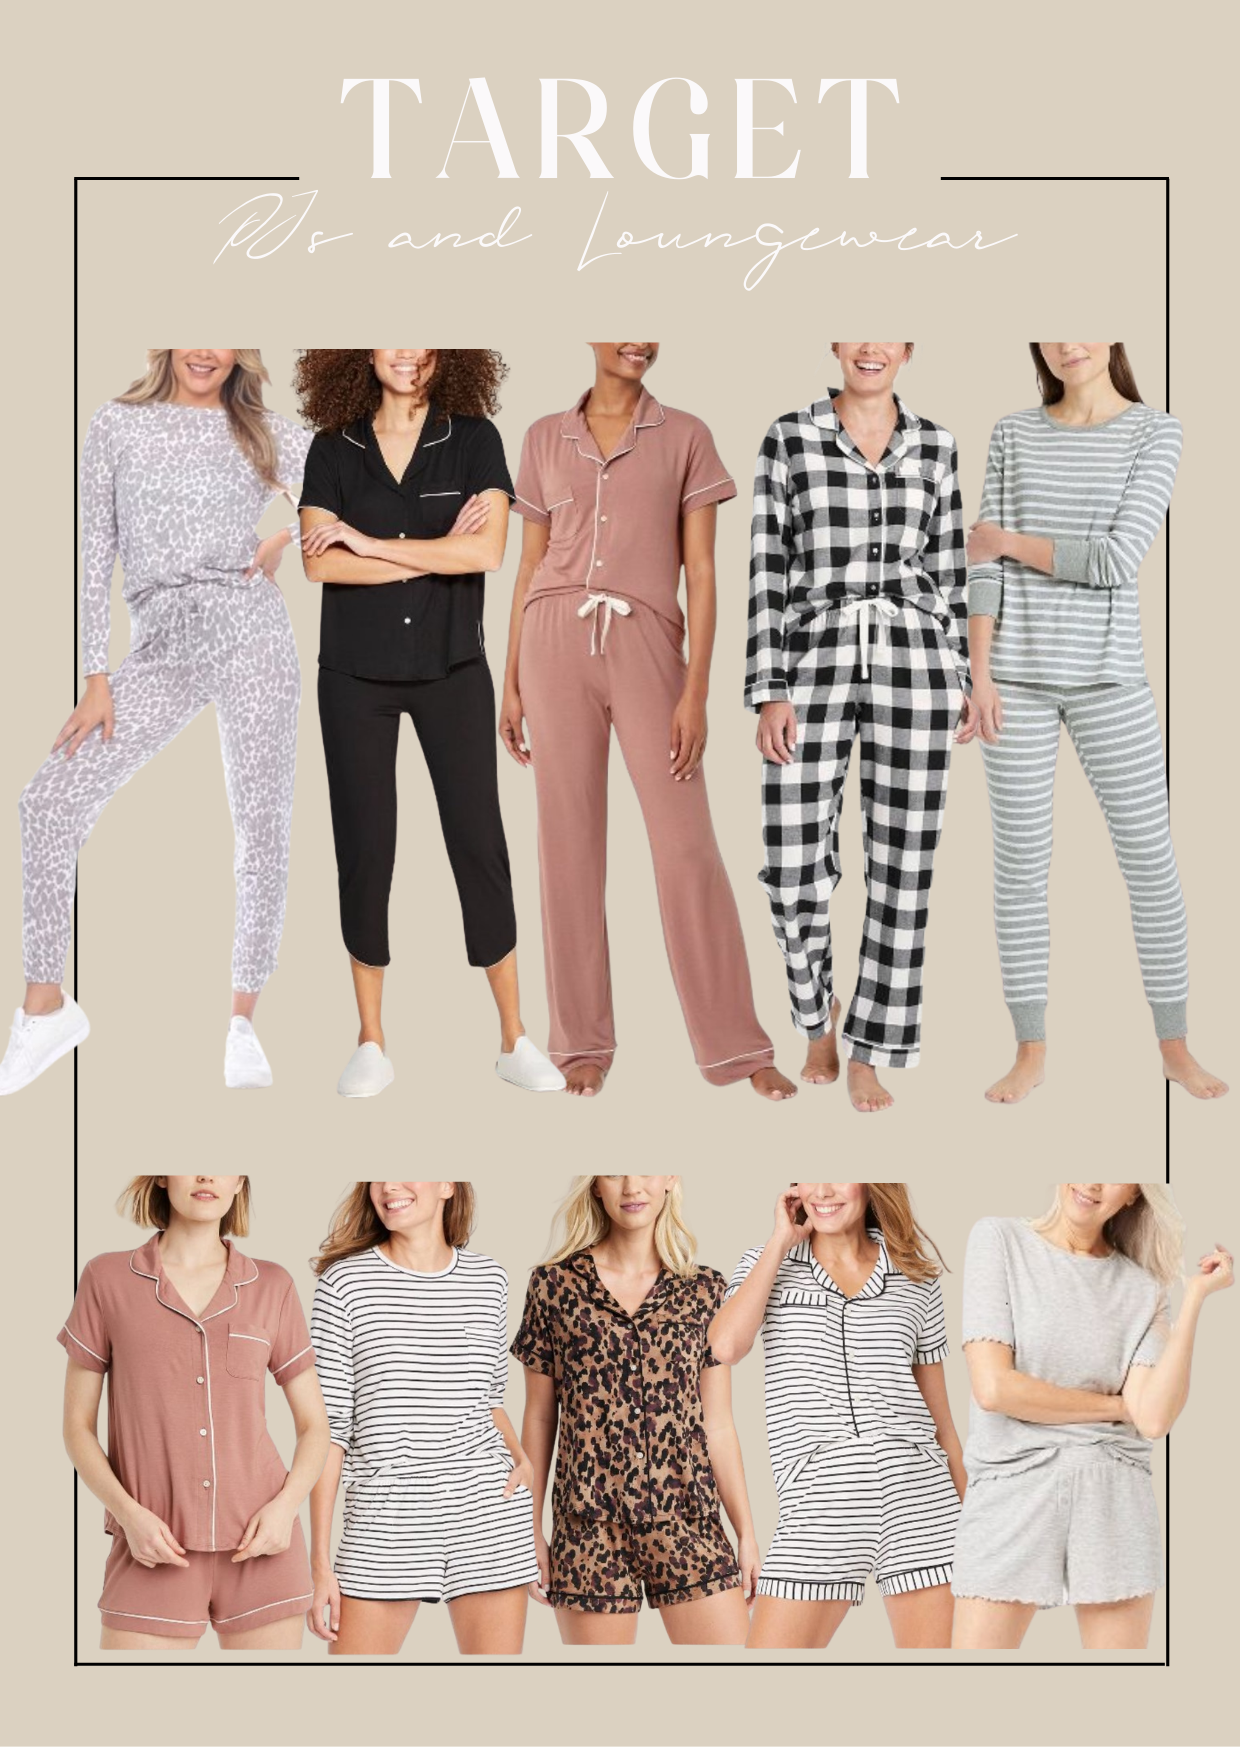 Shopping picks of the week featuring Target Pjs and loungewear